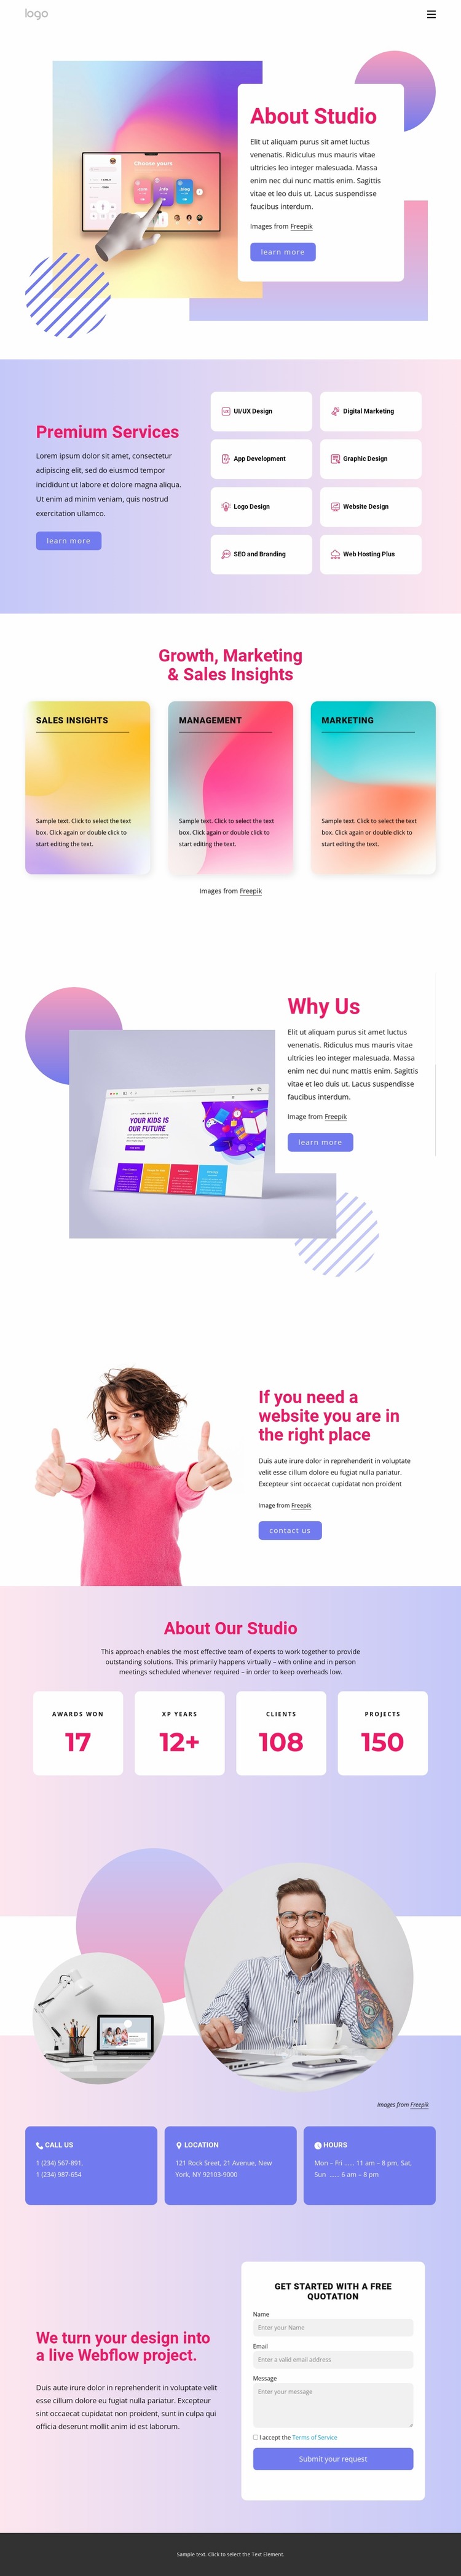 Growth, marketing and sales Website Mockup